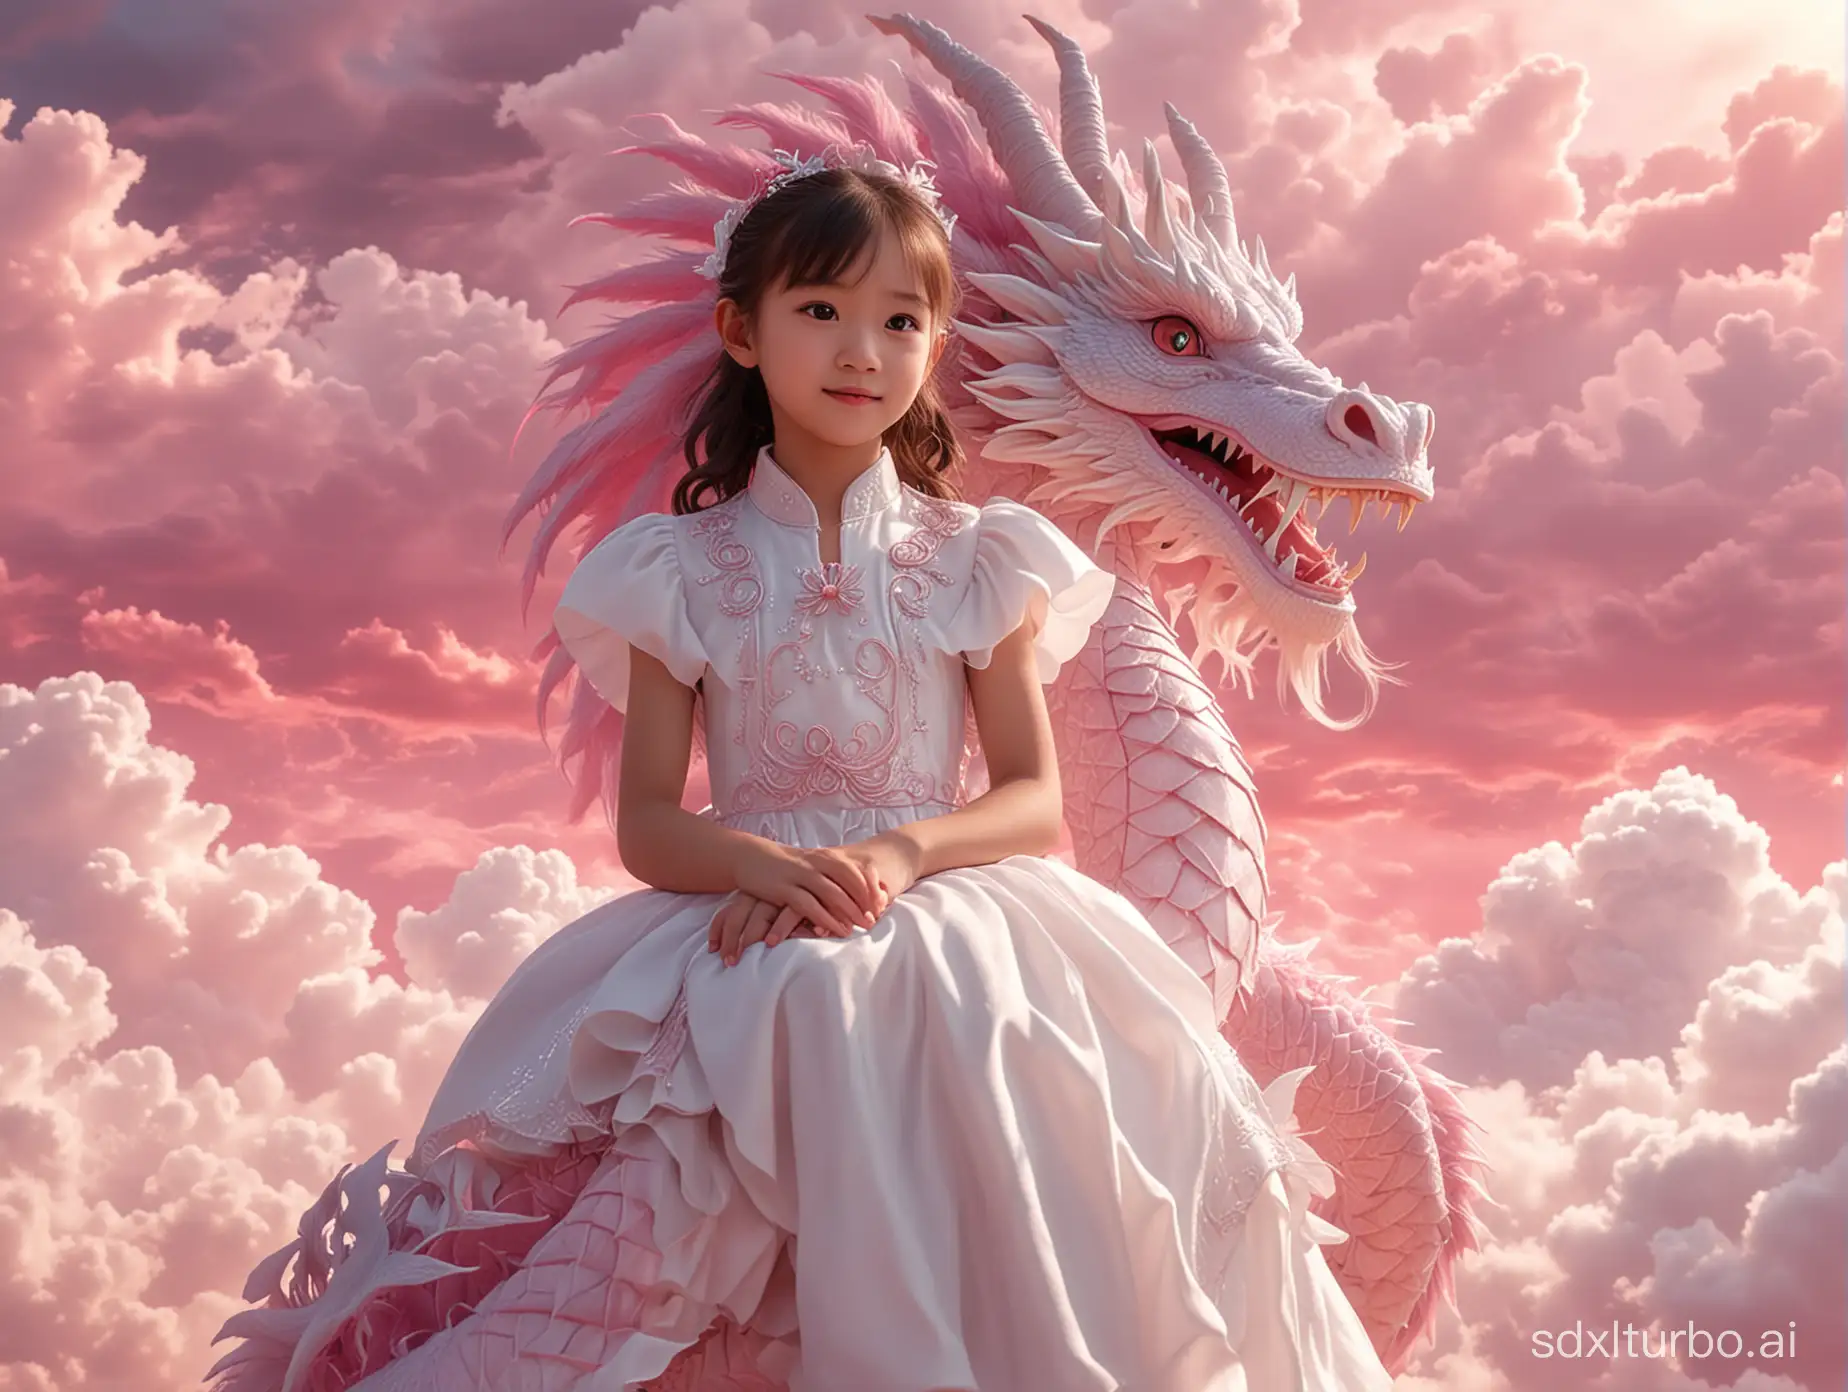 Young-Girl-in-White-Dress-Riding-Pink-Chinese-Dragon-Amidst-Clouds